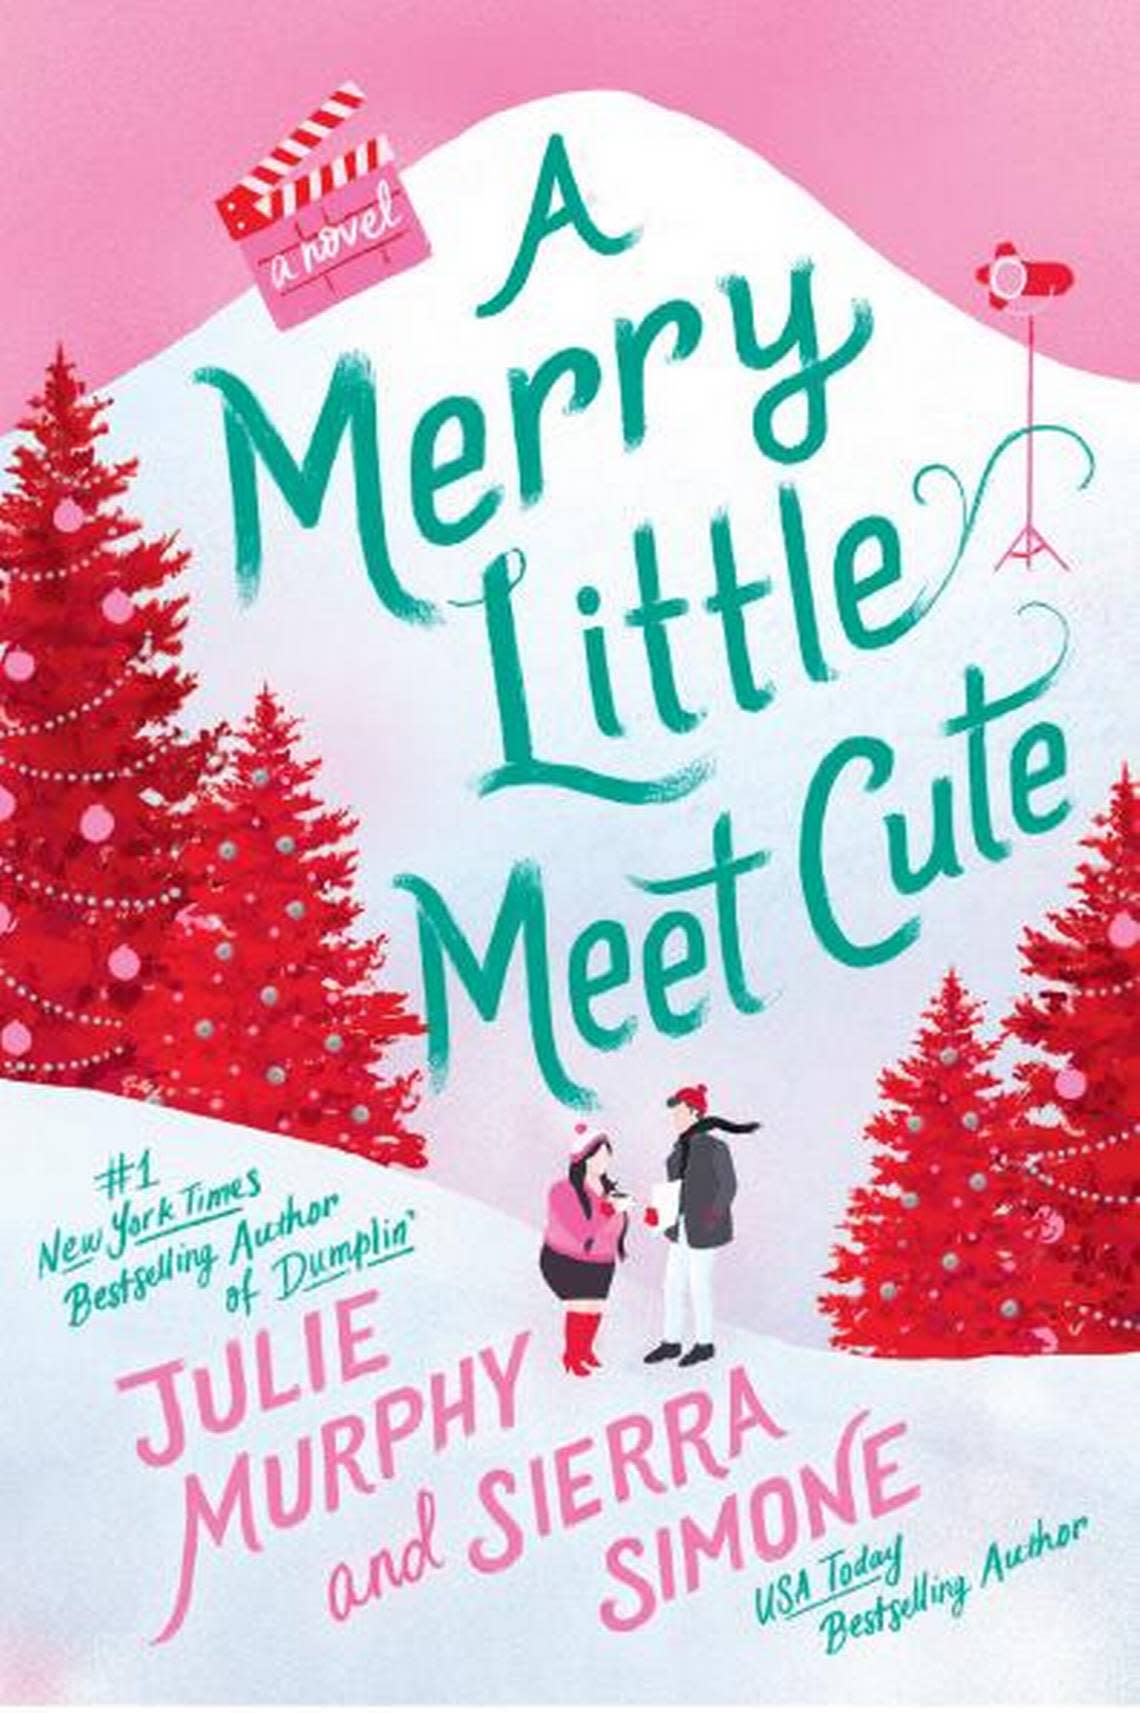 “A Merry Little Meet Cute” might have an innocent cover, but it’s spicy inside. HarperCollins